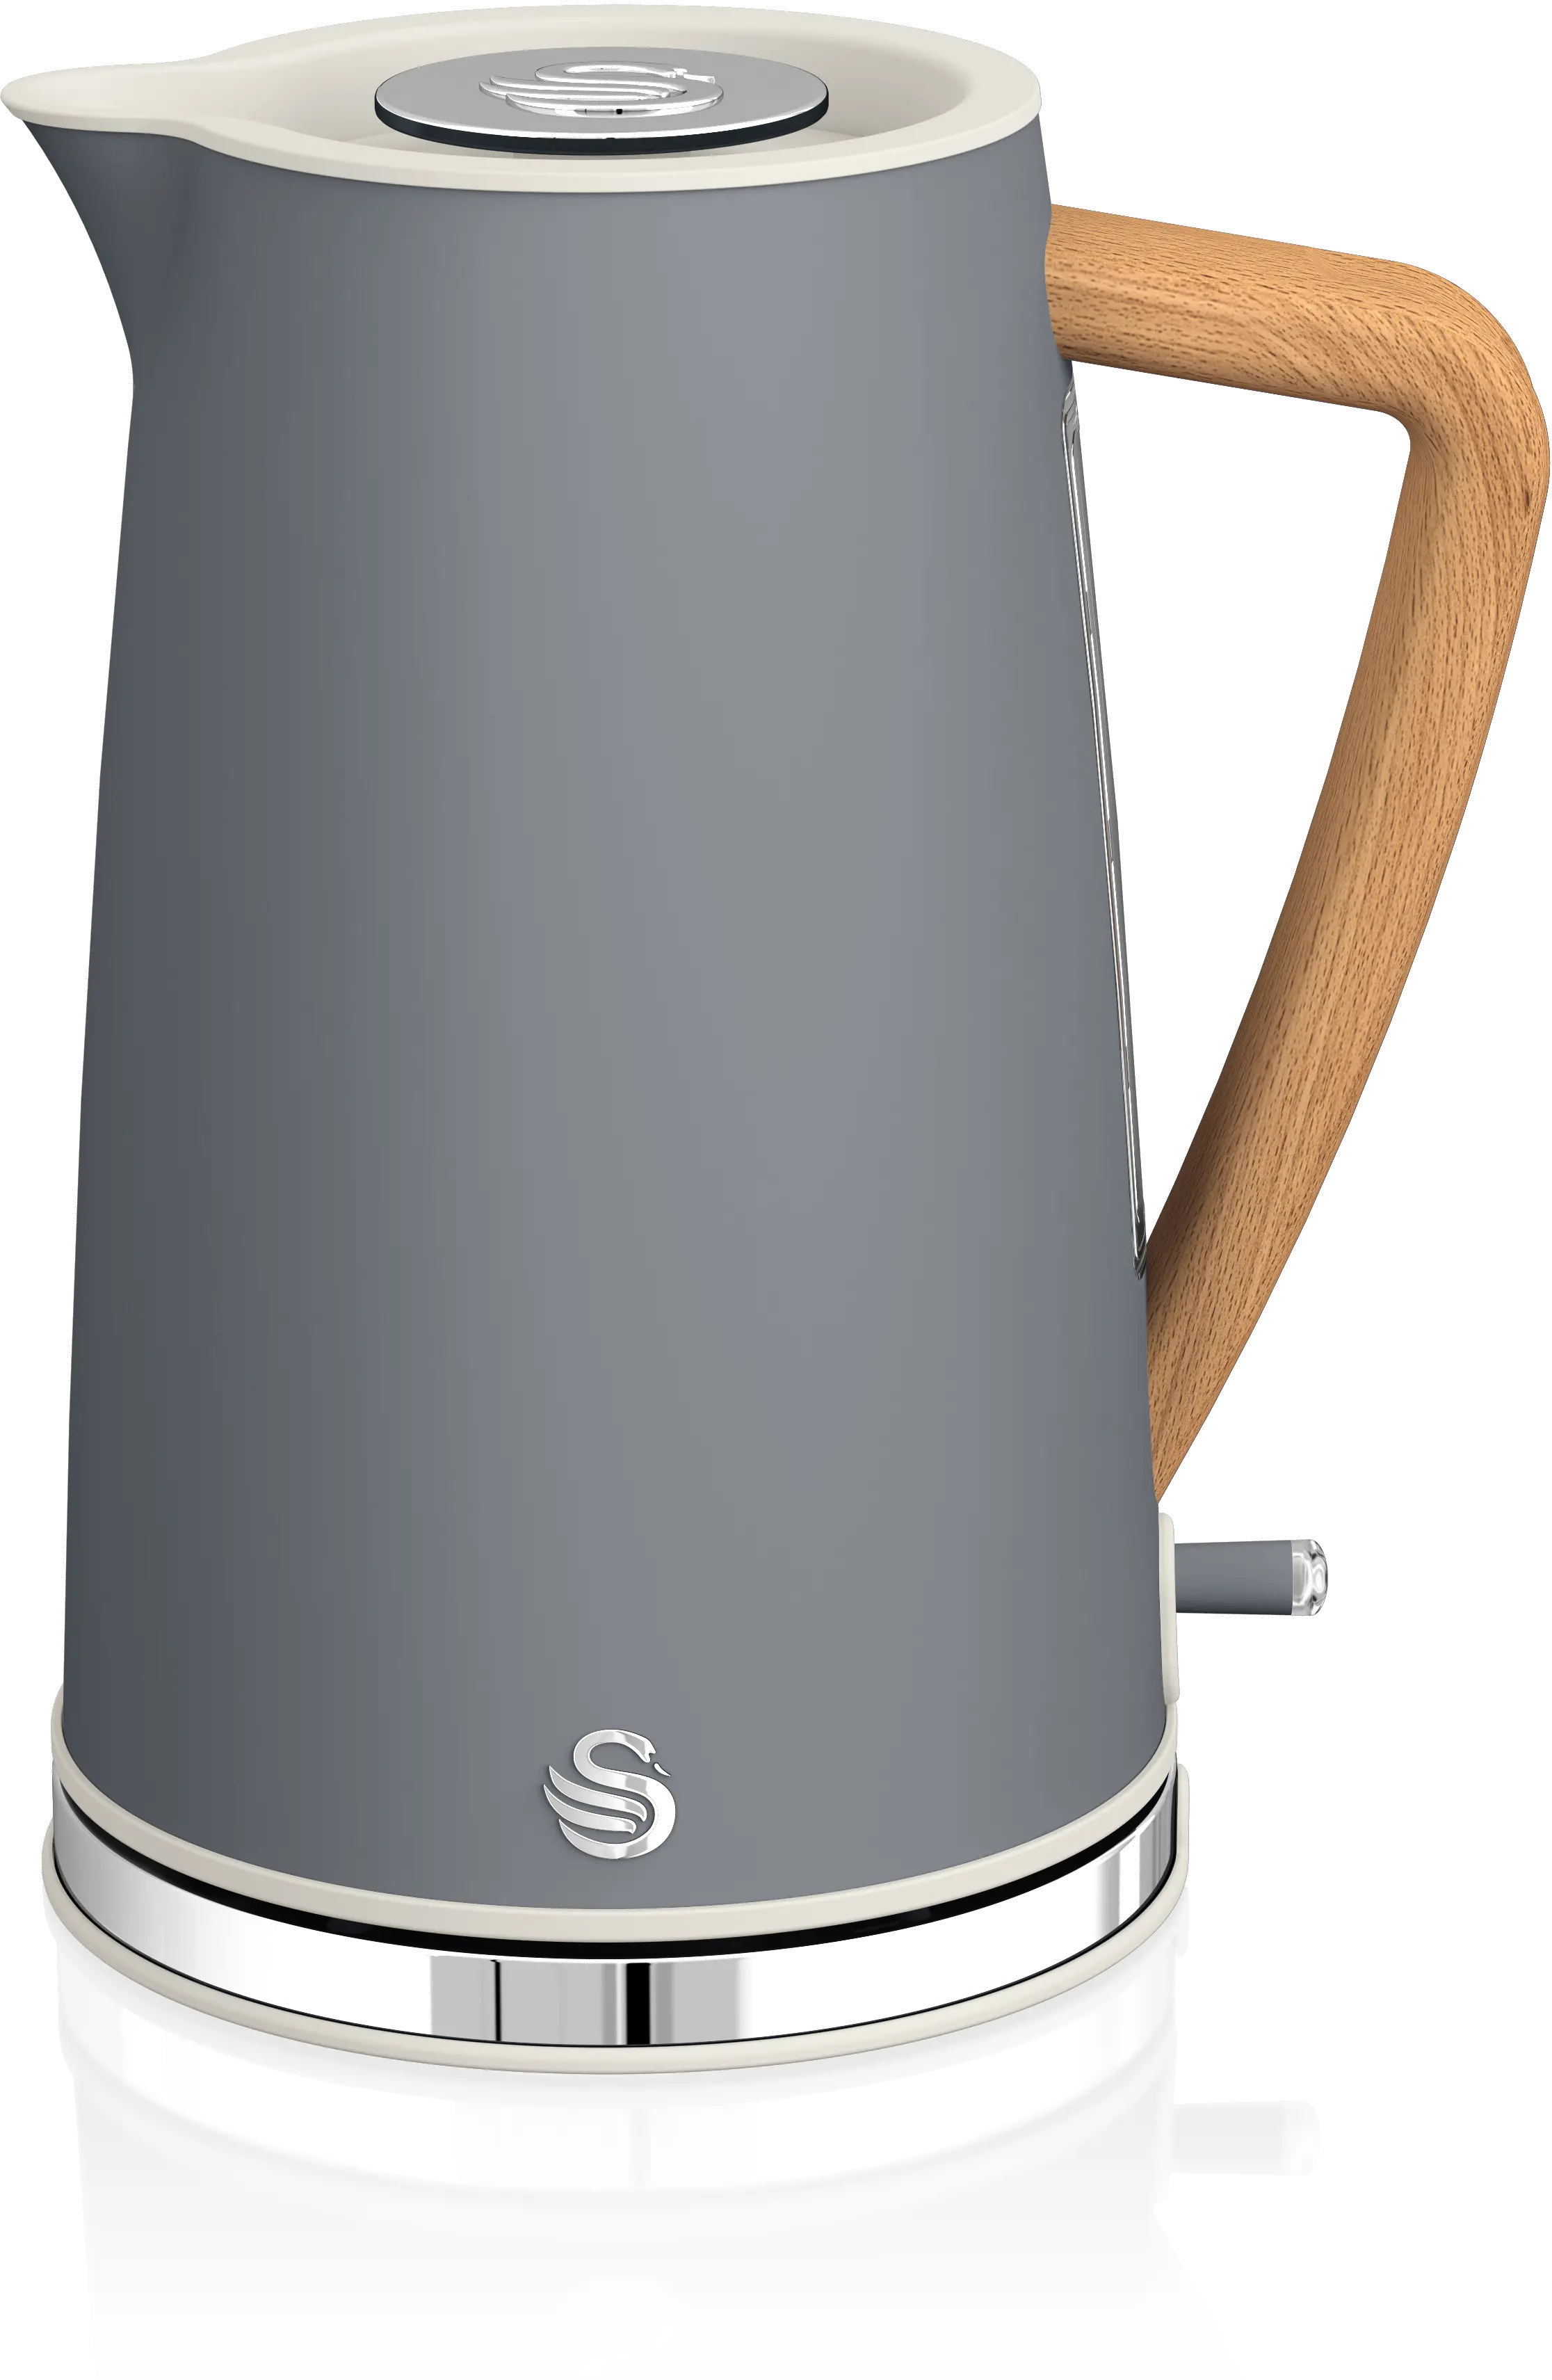 https://static.rcwilley.com/products/112637795/Swan-Nordic-Gray-Cordless-Kettle-rcwilley-image1.webp